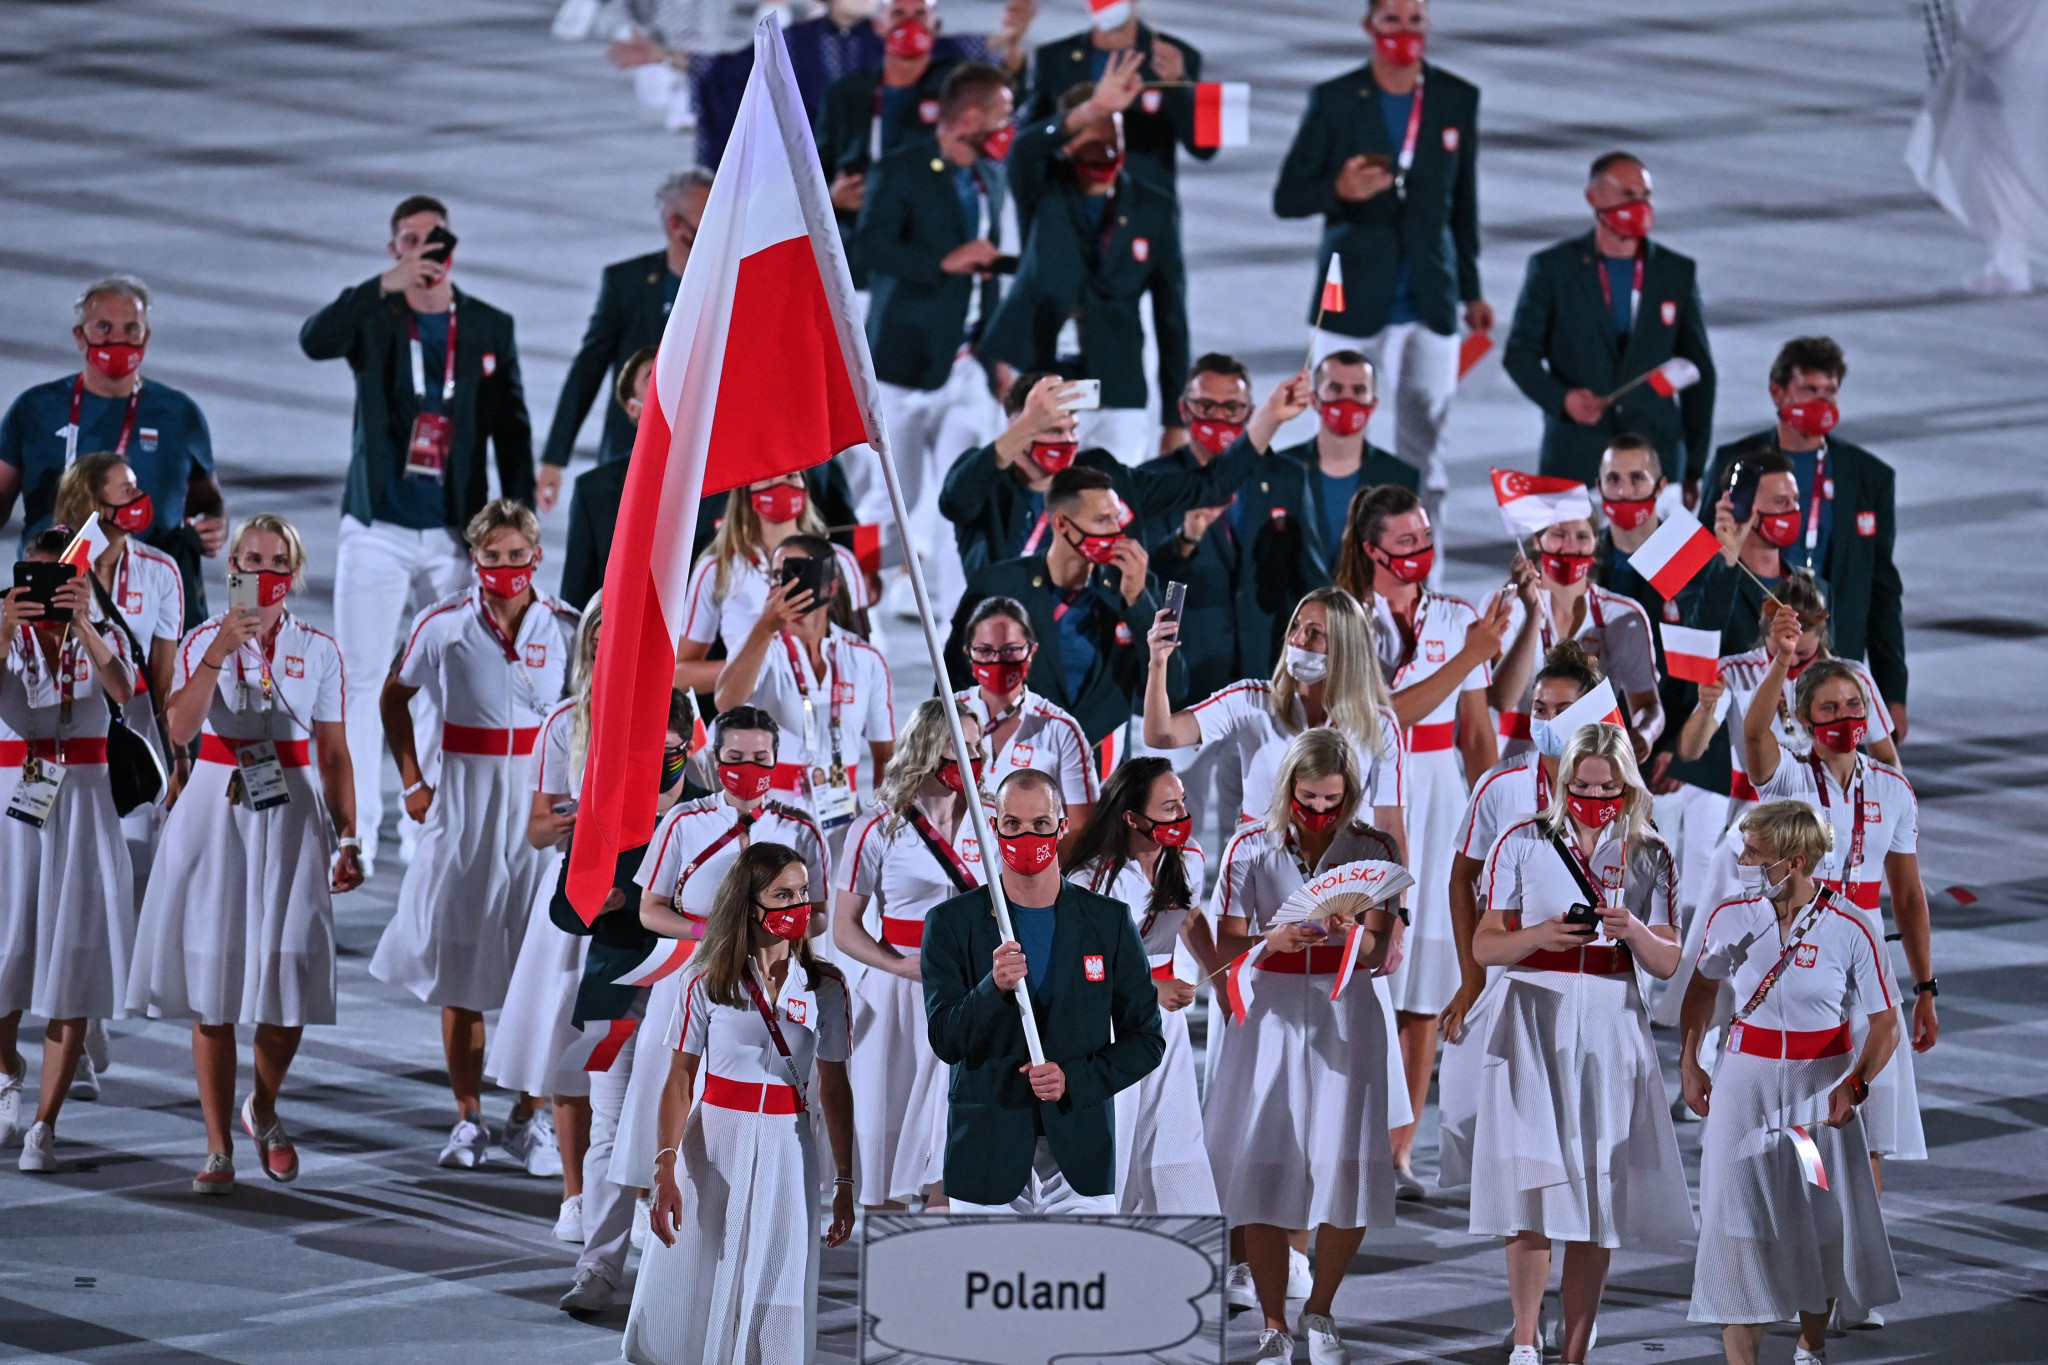 Poland has never hosted the Olympic Games before ©Getty Images